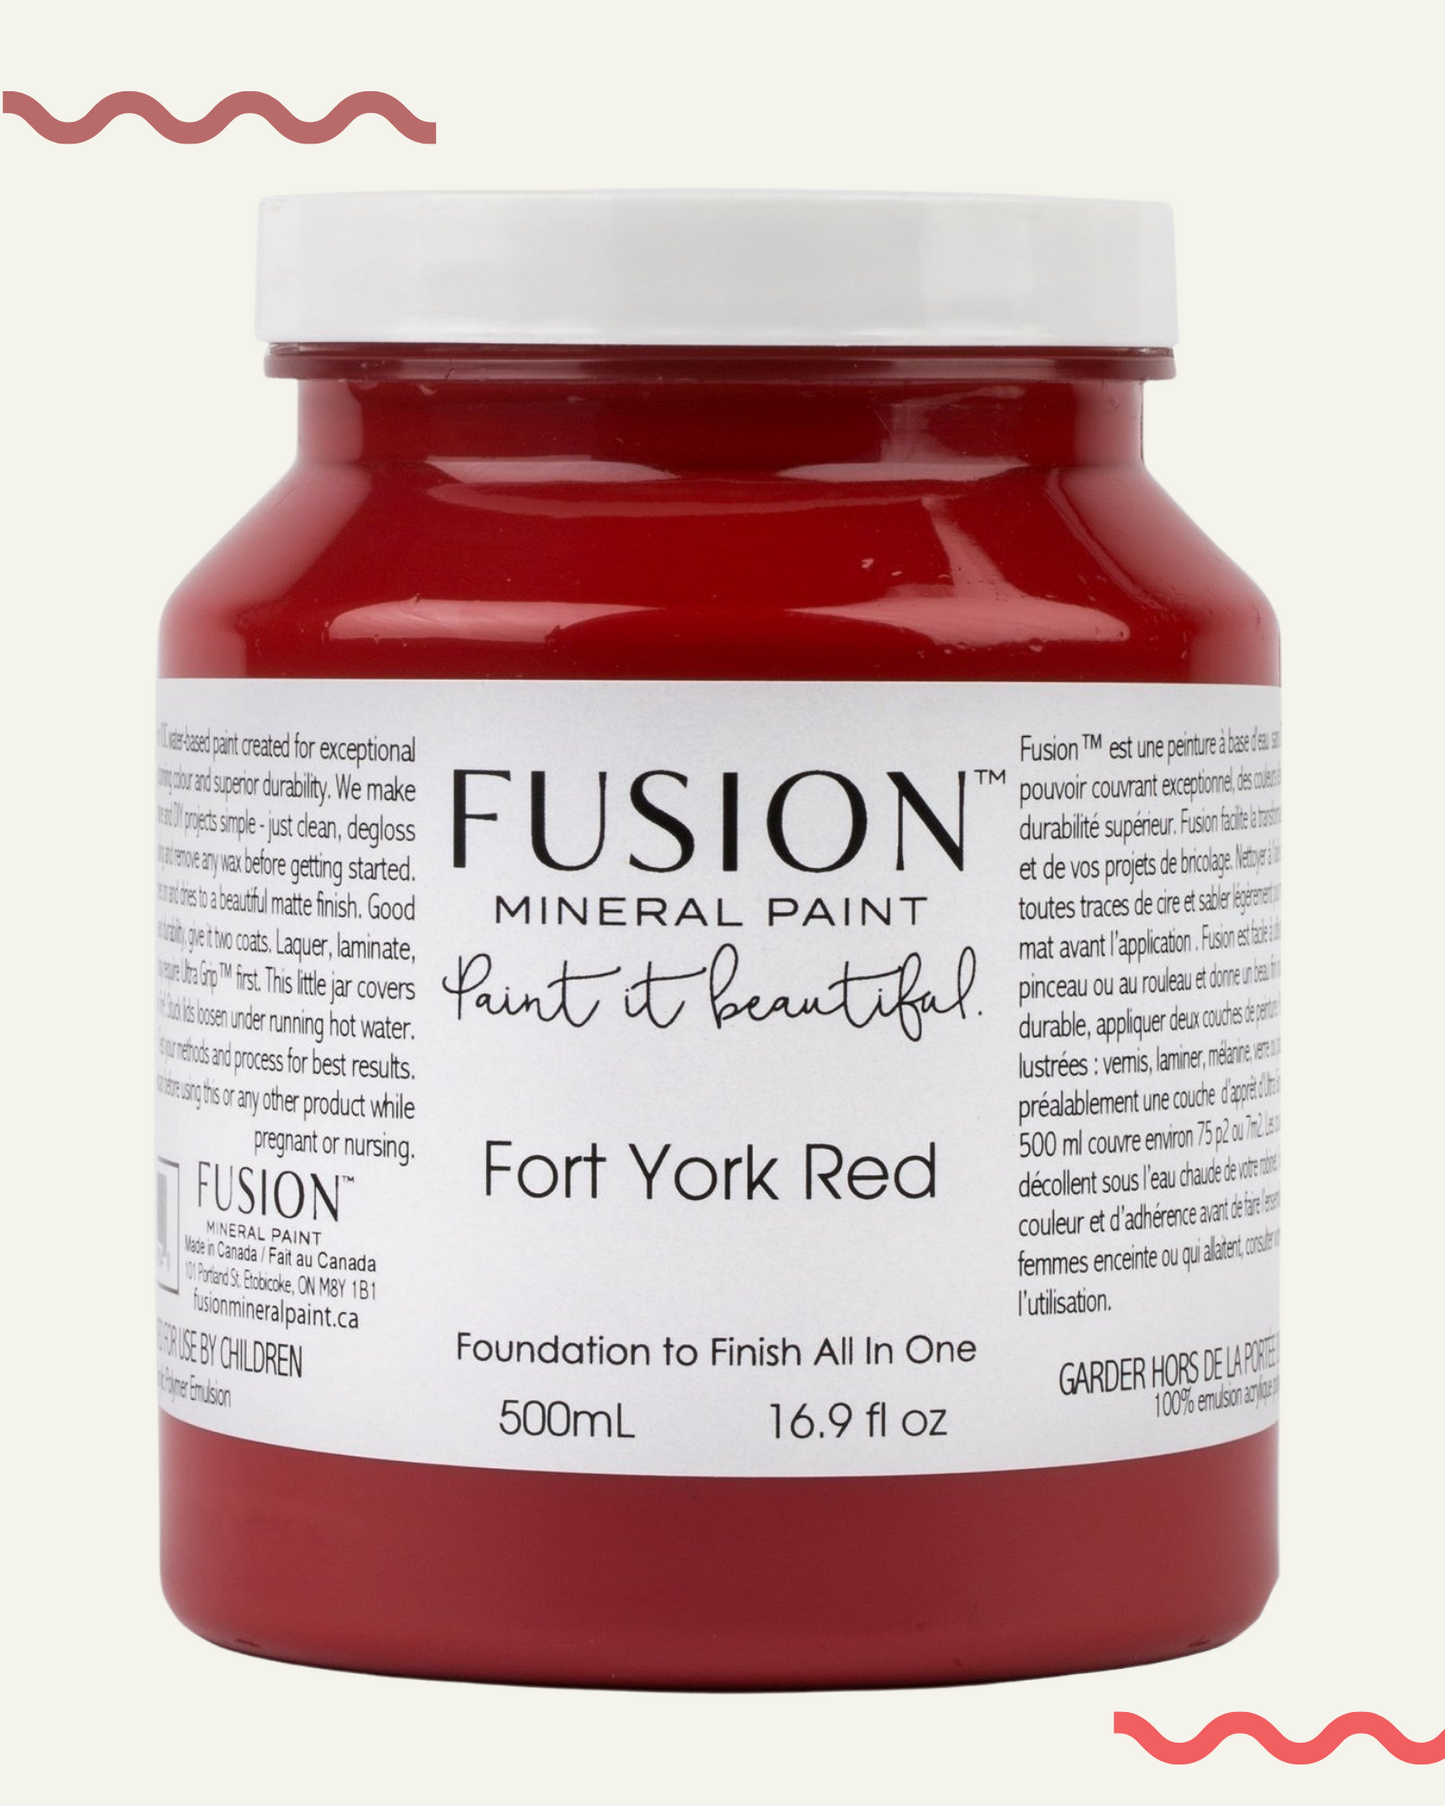 peinture minerale fusion fort york red